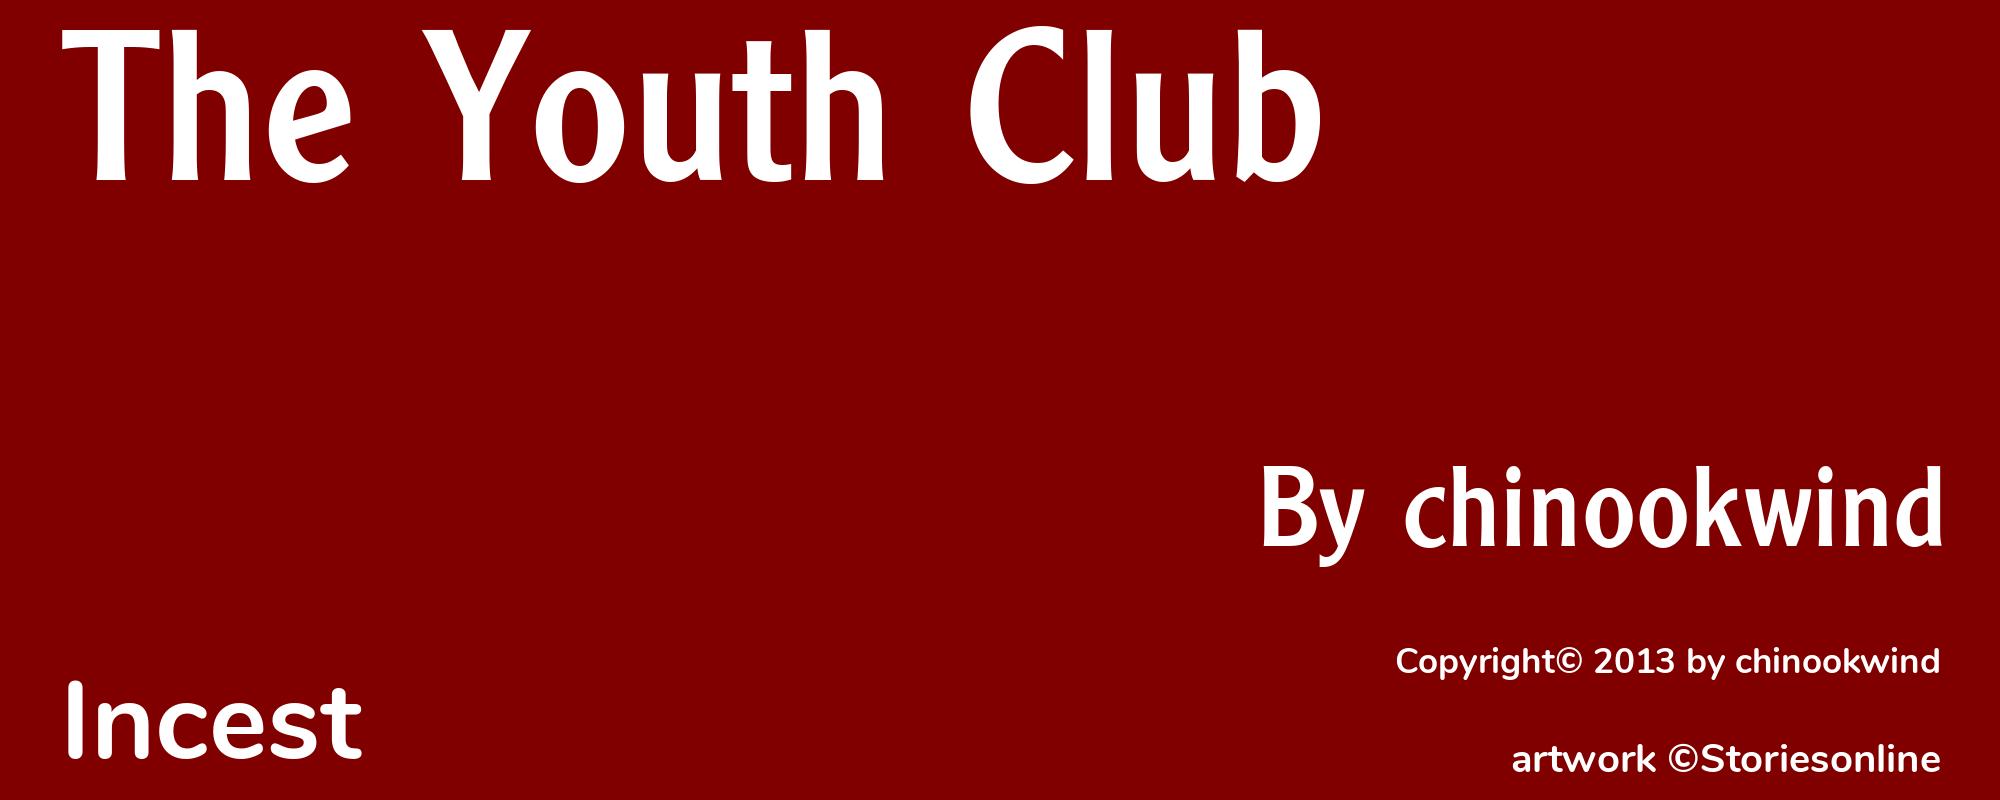 The Youth Club - Cover